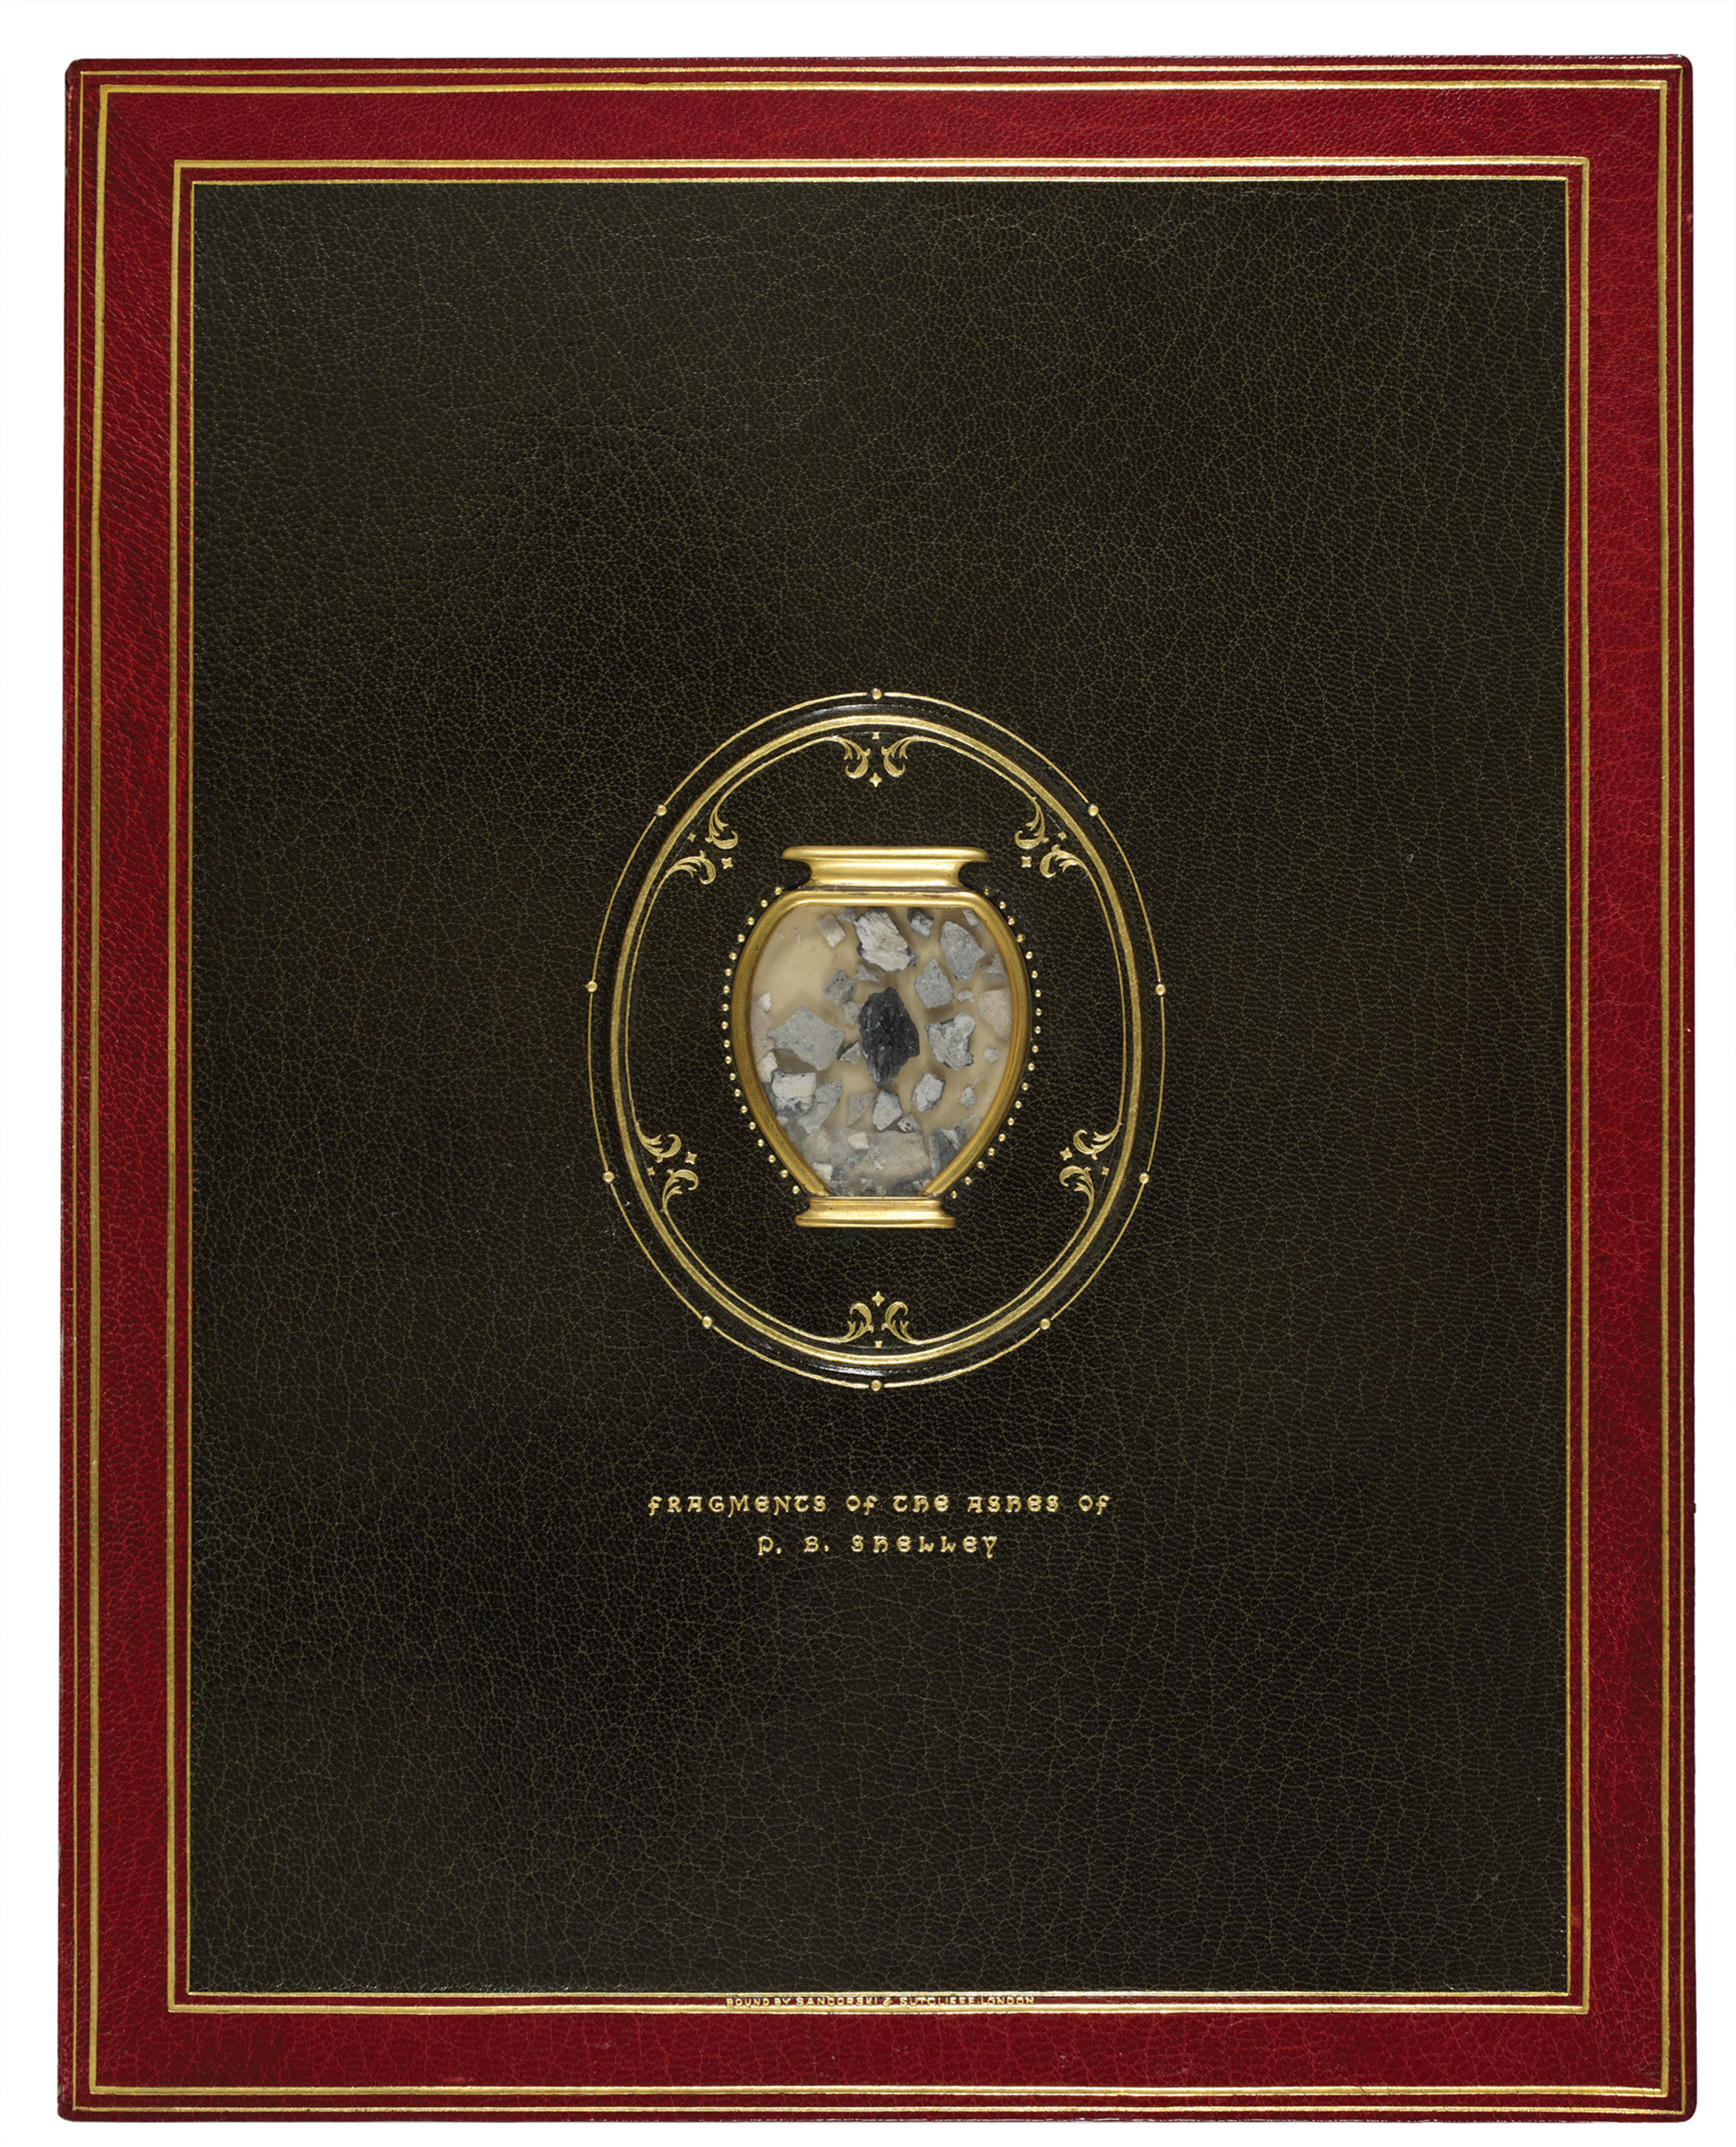 A photograph of the inside back cover of Thomas Wise’s reliquary book purportedly containing a small amount of Shelley’s ashes and fragments of his skull.